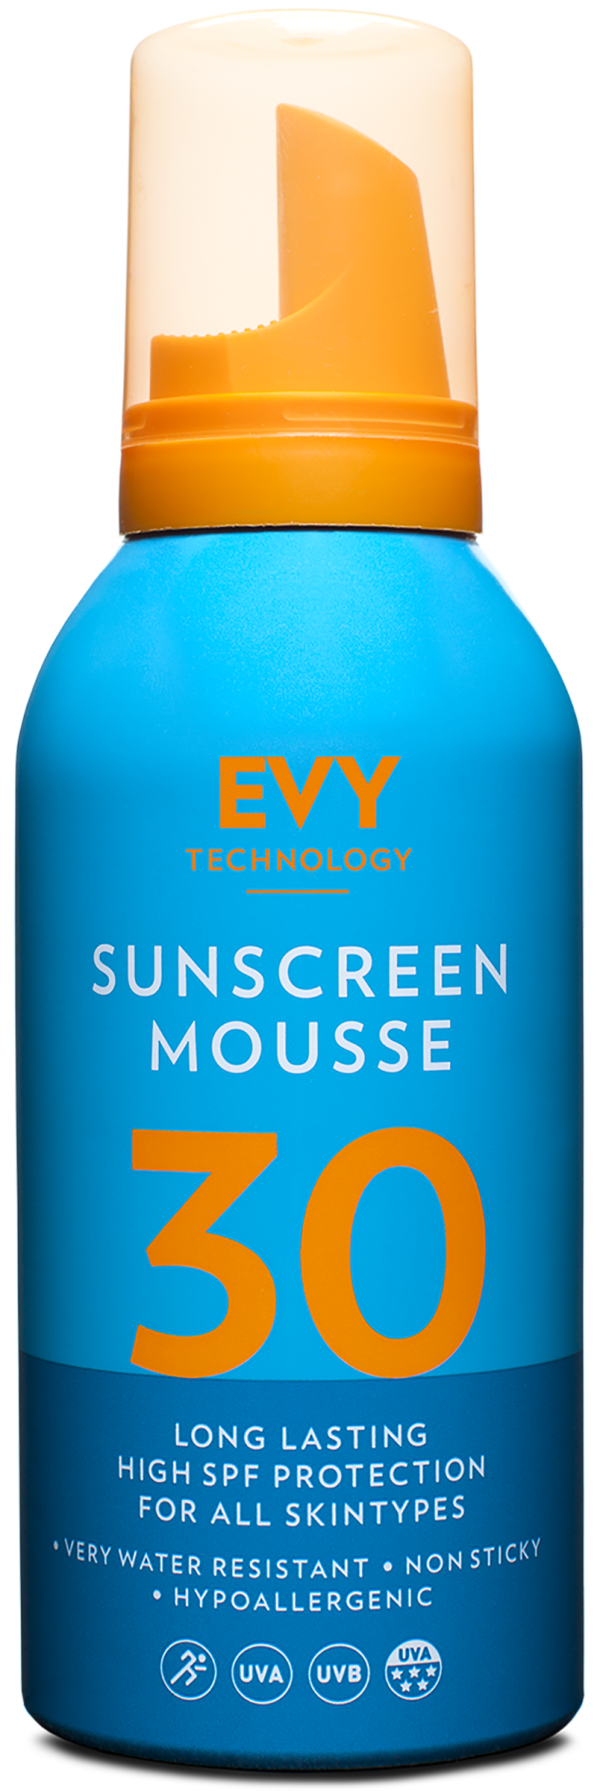 Evy sunscreen mousse SPF 30 150 ml